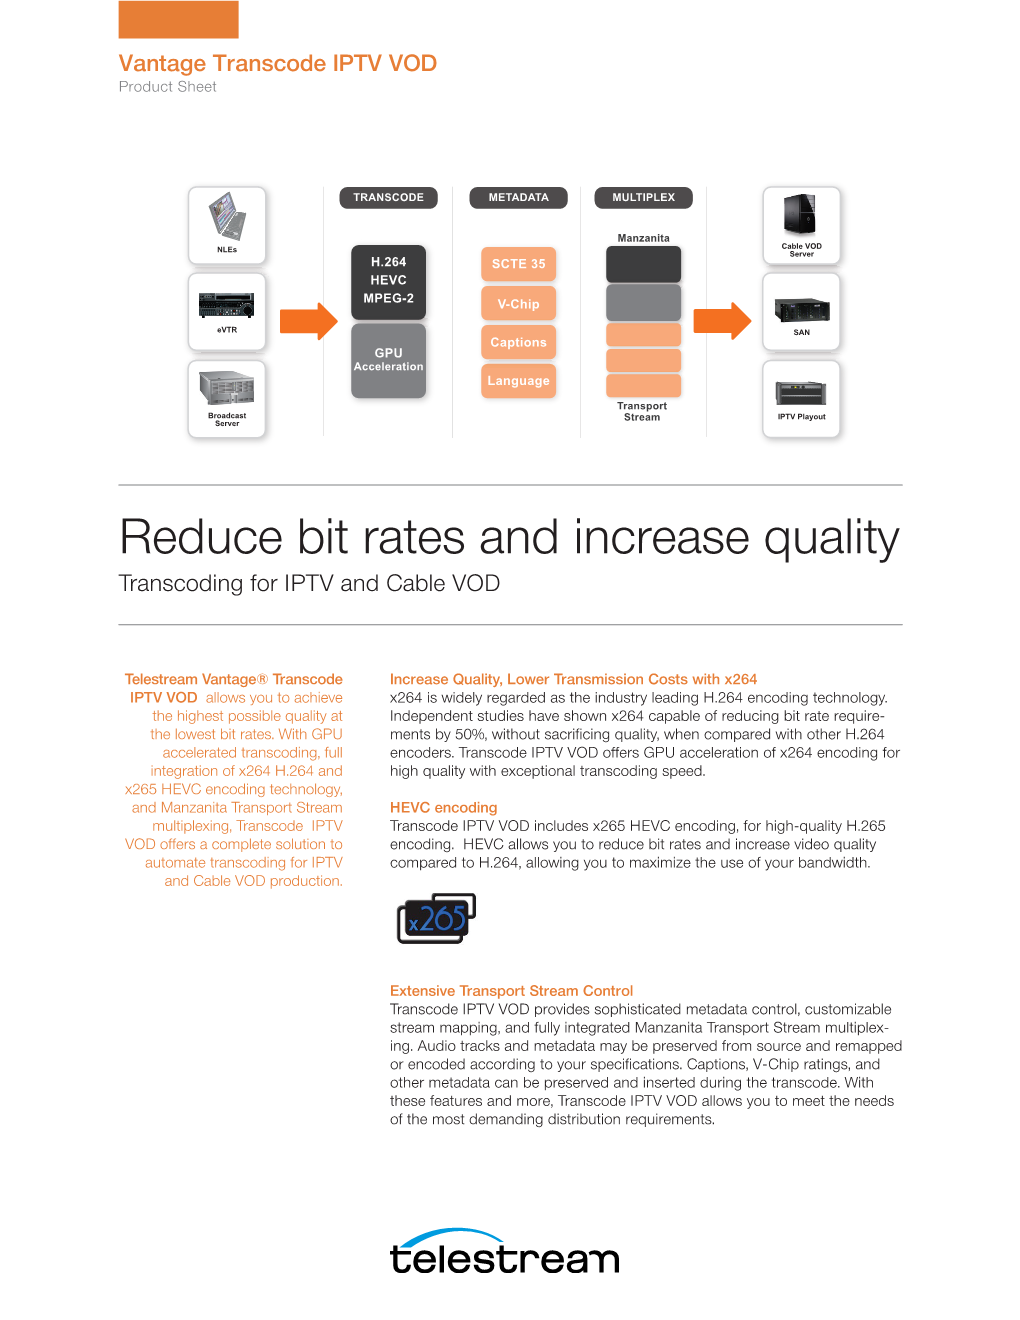 Reduce Bit Rates and Increase Quality Transcoding for IPTV and Cable VOD